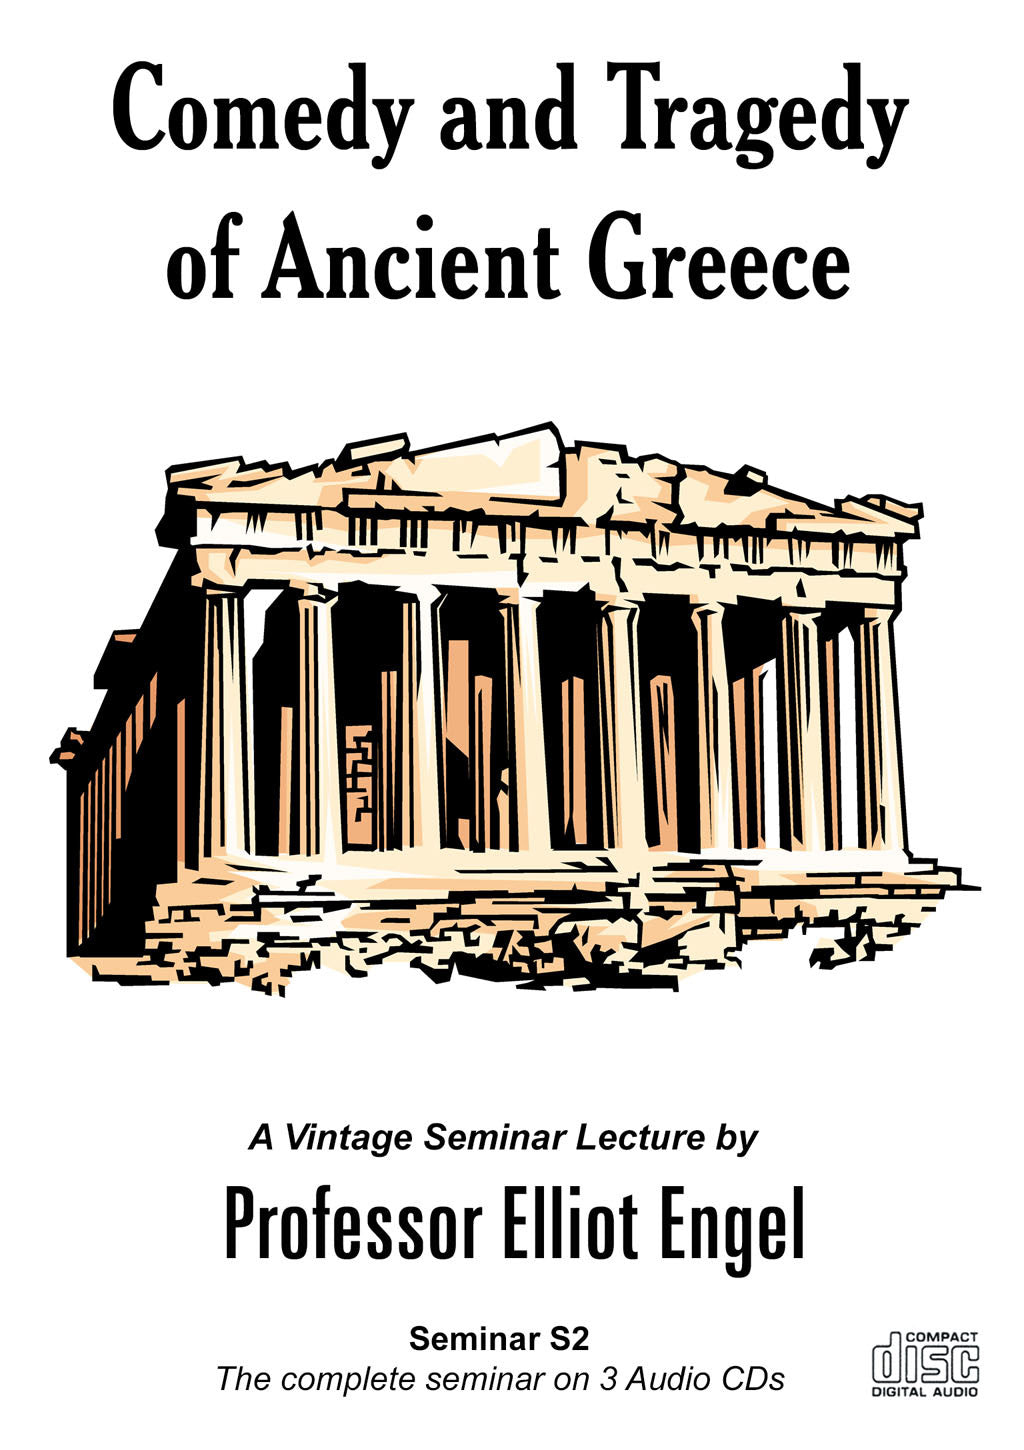 Seminar 02: The Comedy and Tragedy of Ancient Greece